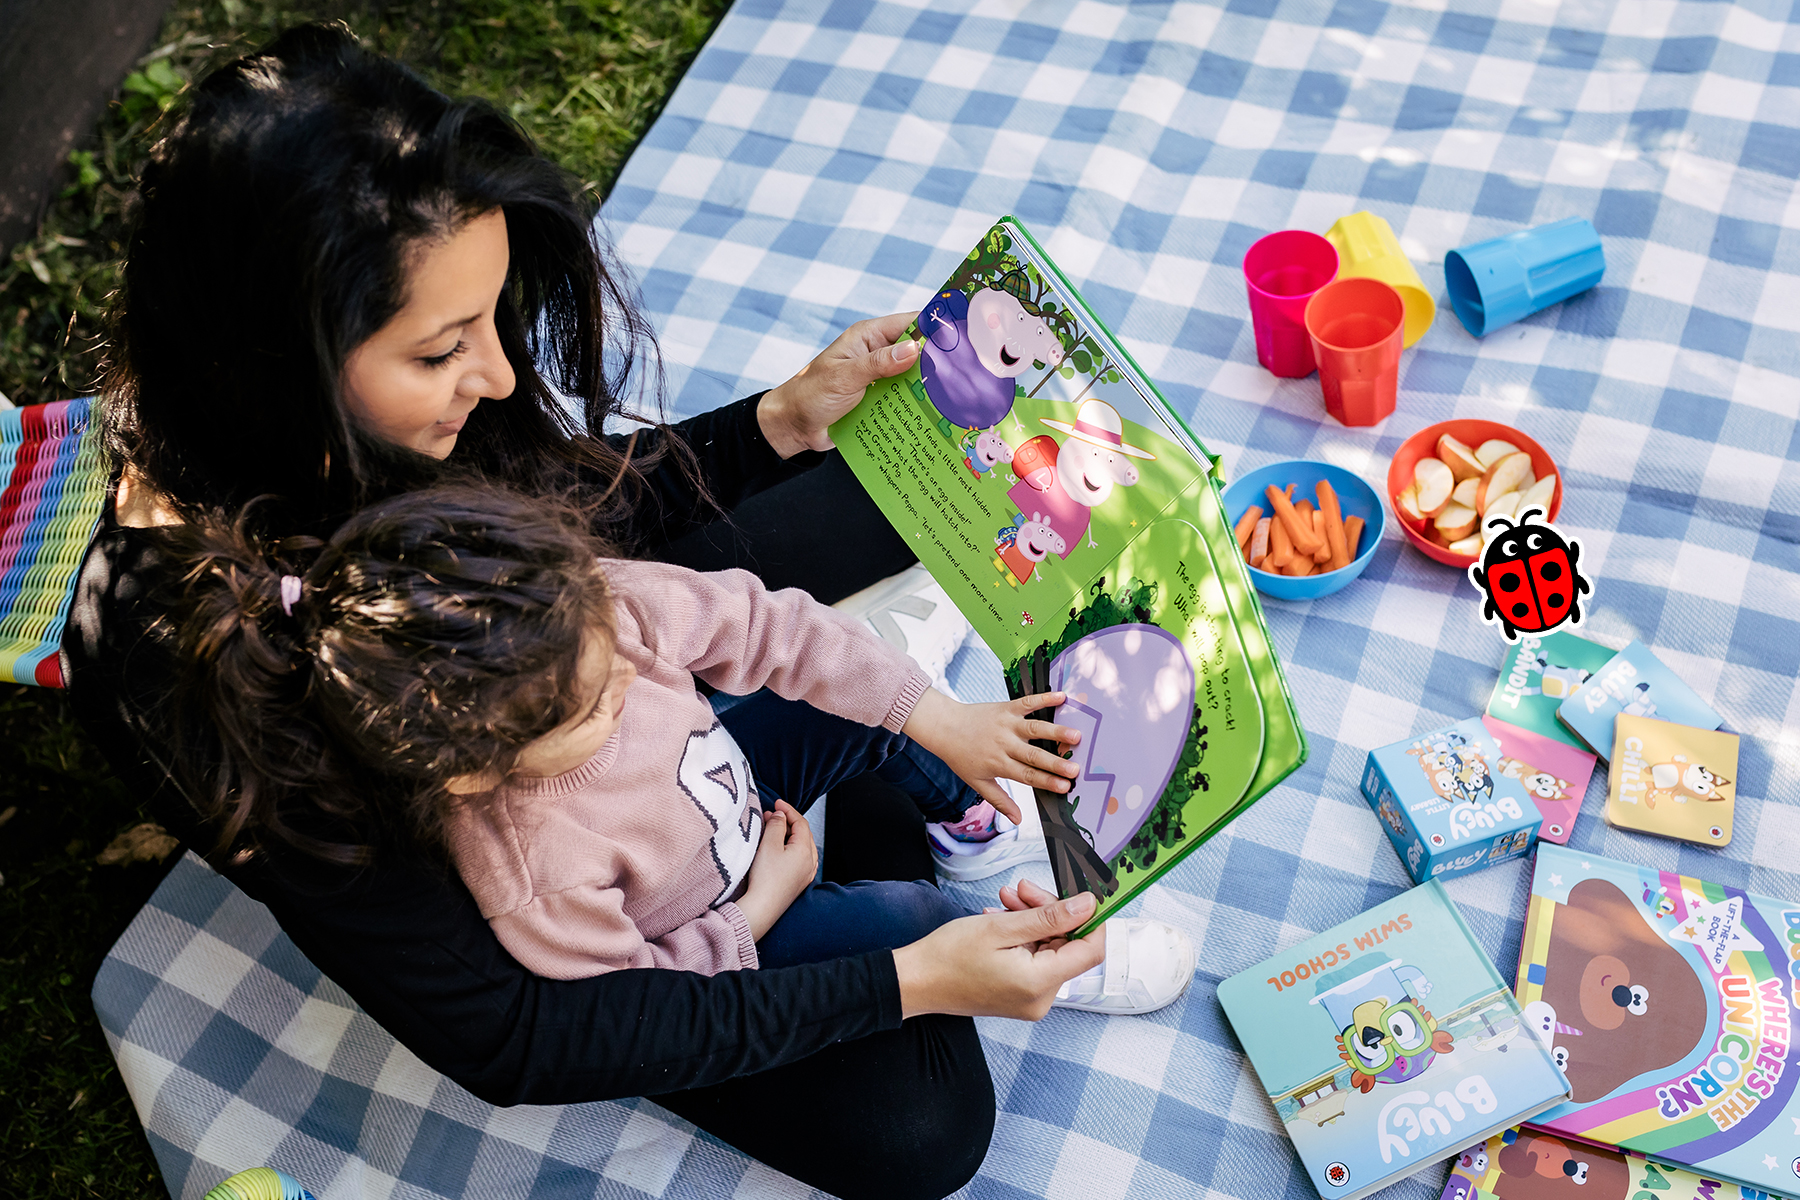 An image of a mother reading to her child as they sit on a picnic blanket surrounded by other Ladybird books and healthy snacks included apple slices and carrot. There is a Ladybird logo sticker on the bowl of apple slices